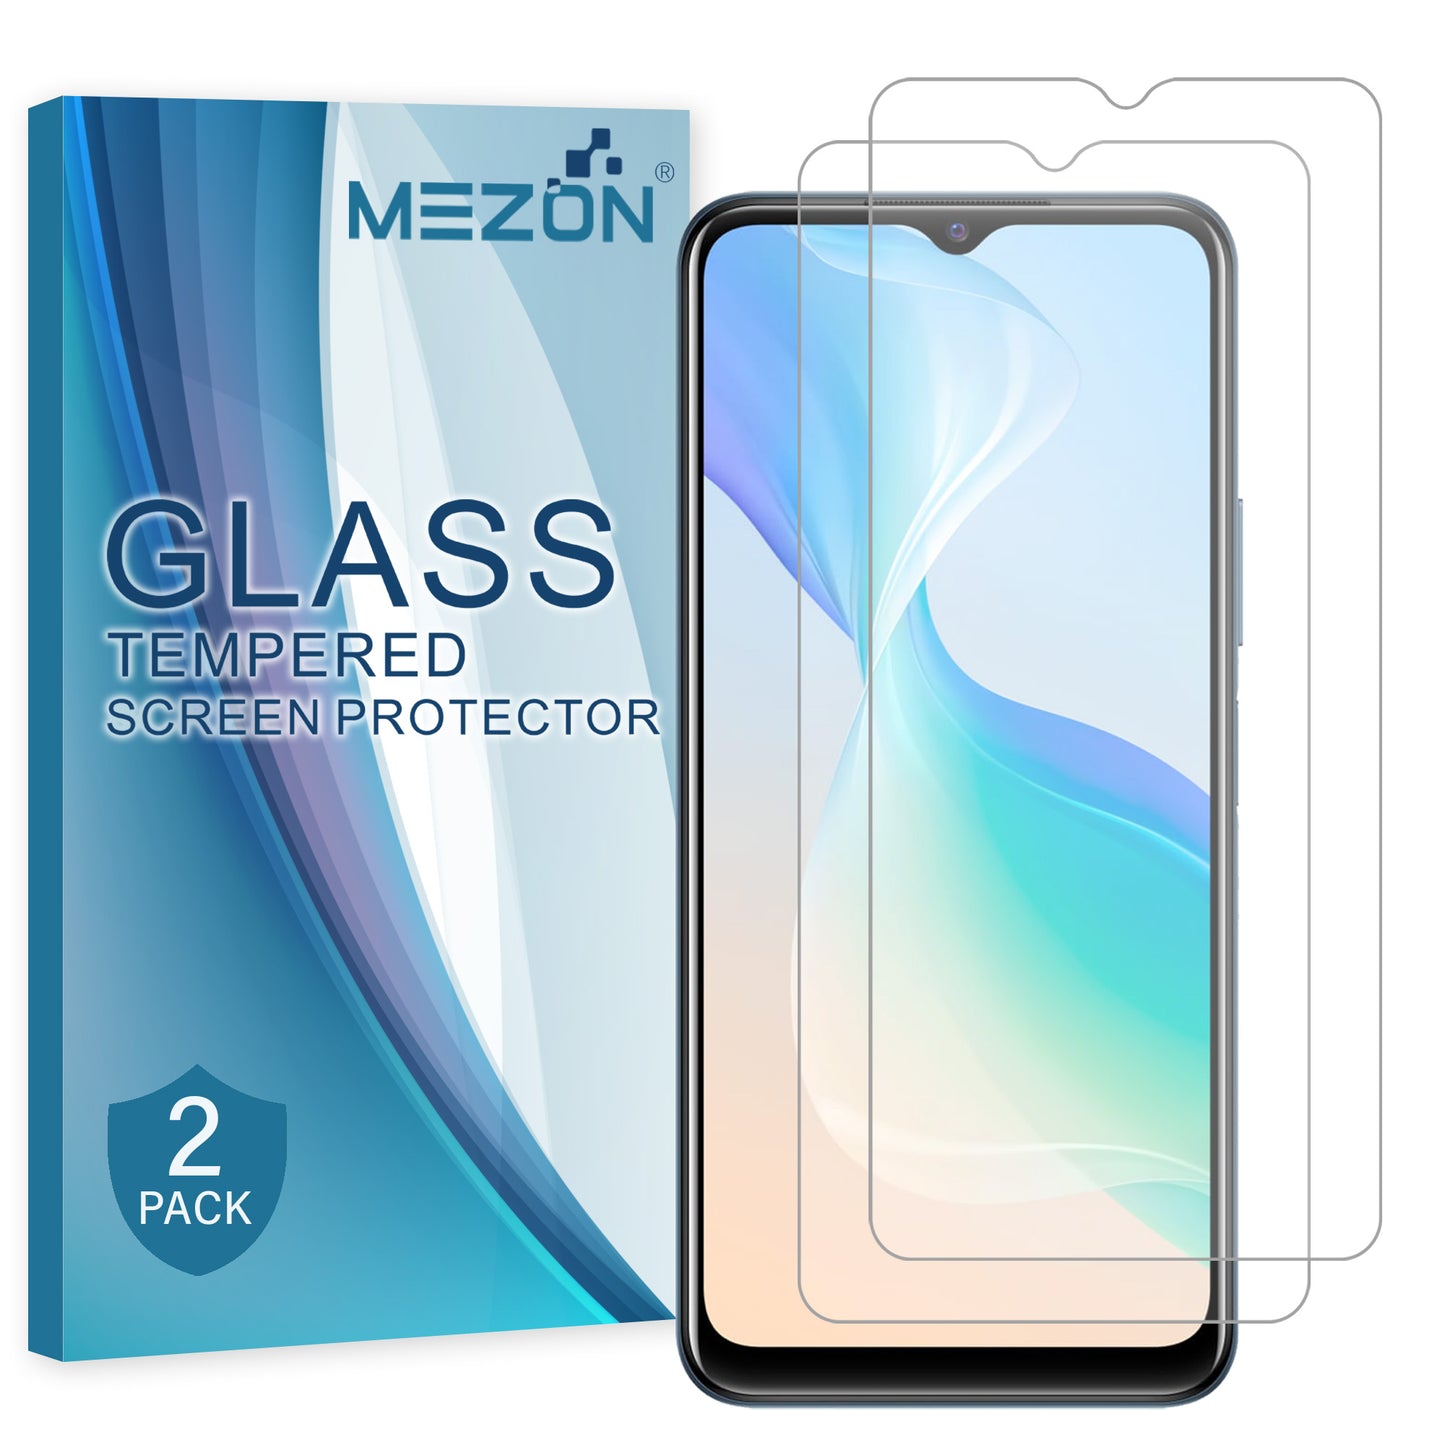 [2 Pack] MEZON Vivo Y55 5G Tempered Glass 9H HD Crystal Clear Premium Case Friendly Screen Protector (Vivo Y55 5G, 9H)